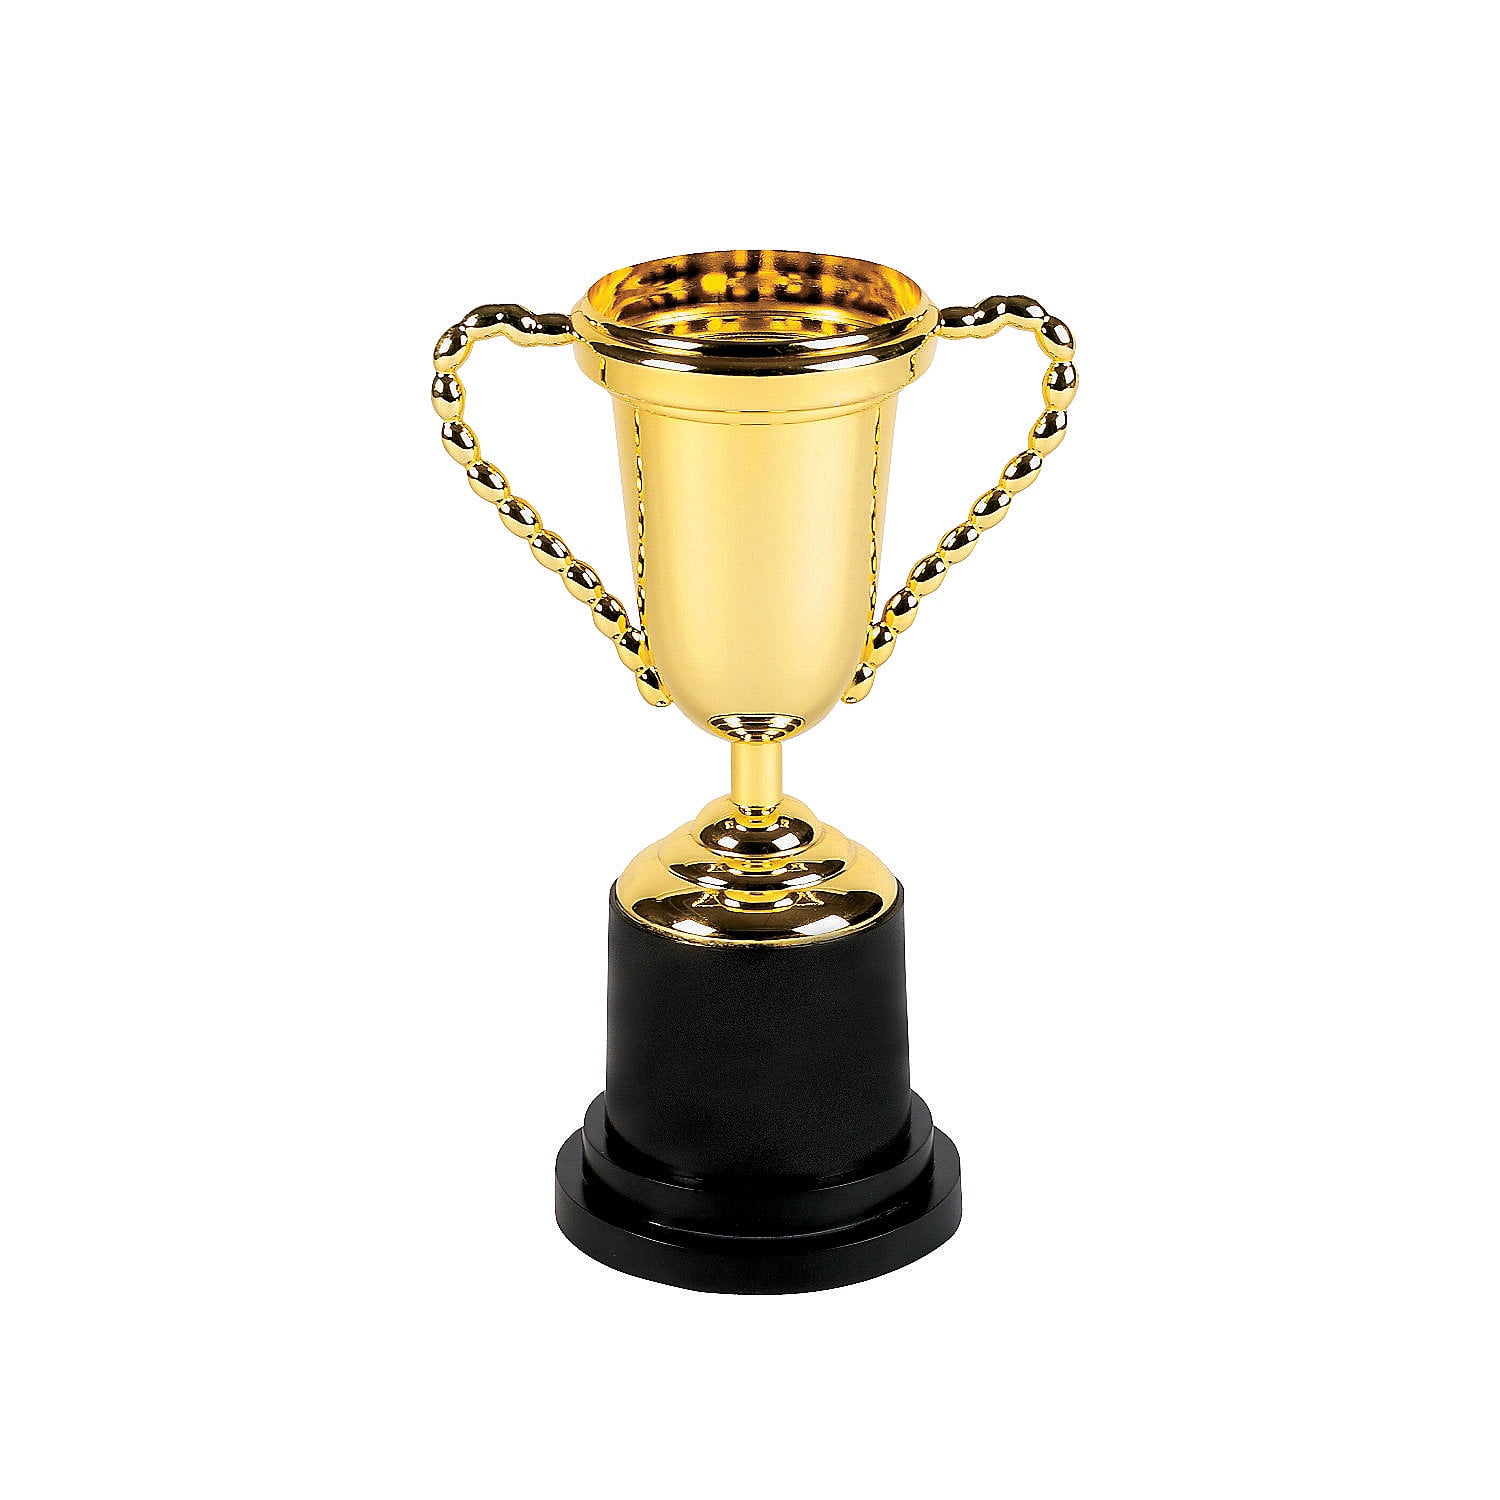 Kisangel Golden Sports Award Trophy Meta Match Tournaments Gold Trophy Cups Competitive Trophy Honor Trophy for Award Ceremony Appreciation Gift 24 5cm